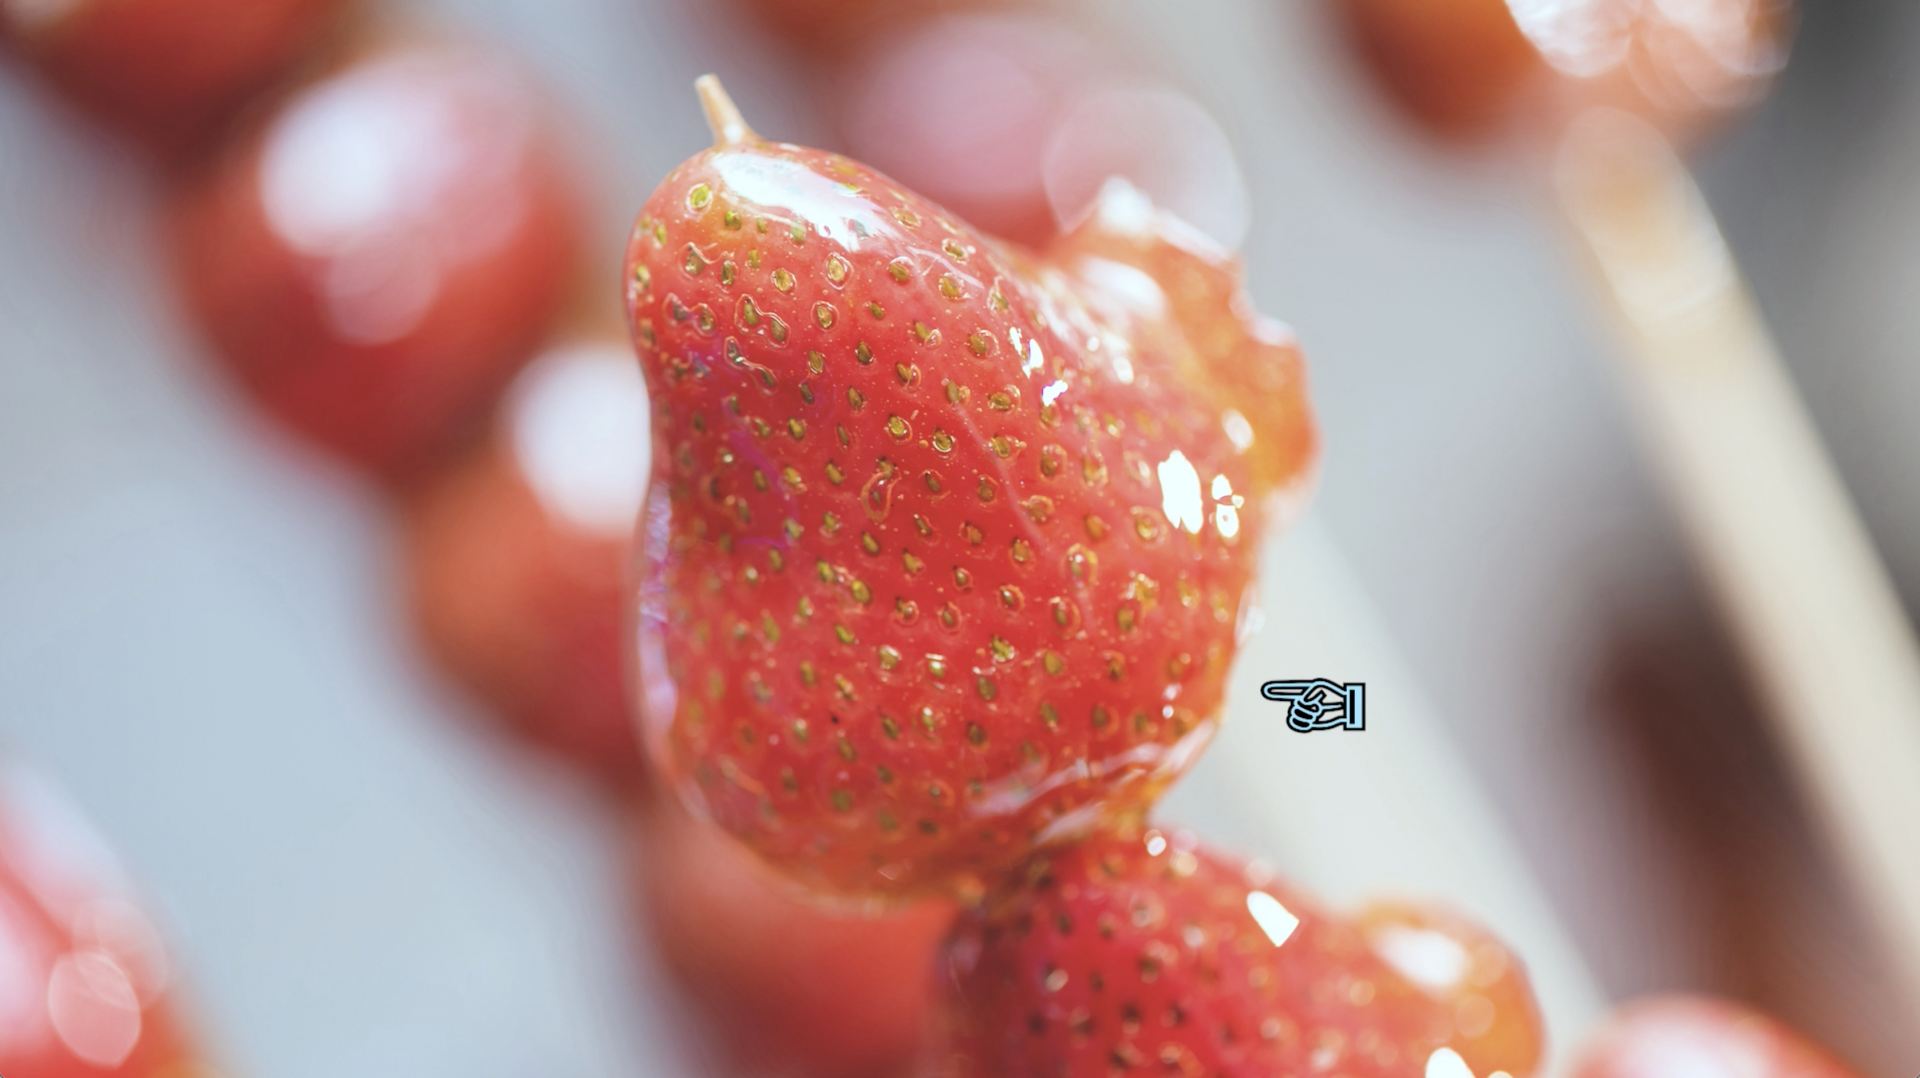 A close-up photo of a strawberry on a skewer.